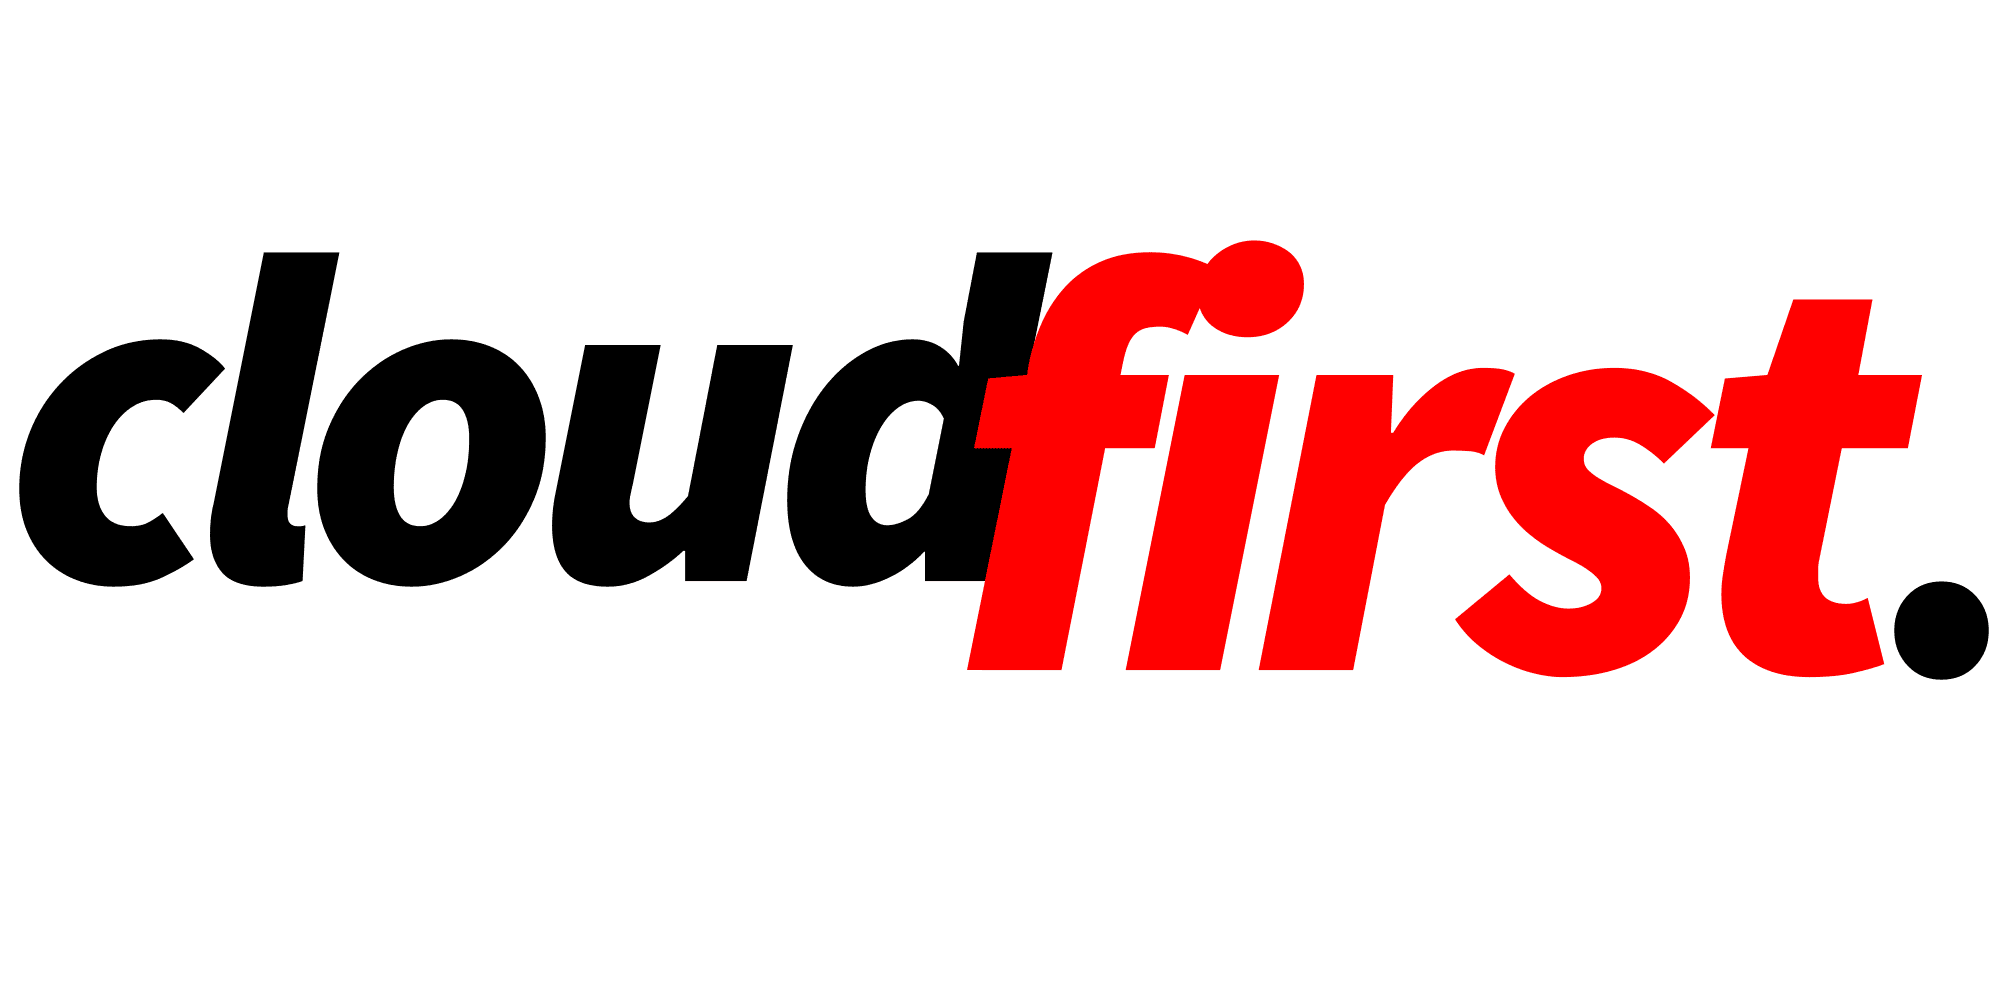 cloud first focus on cloud IT support